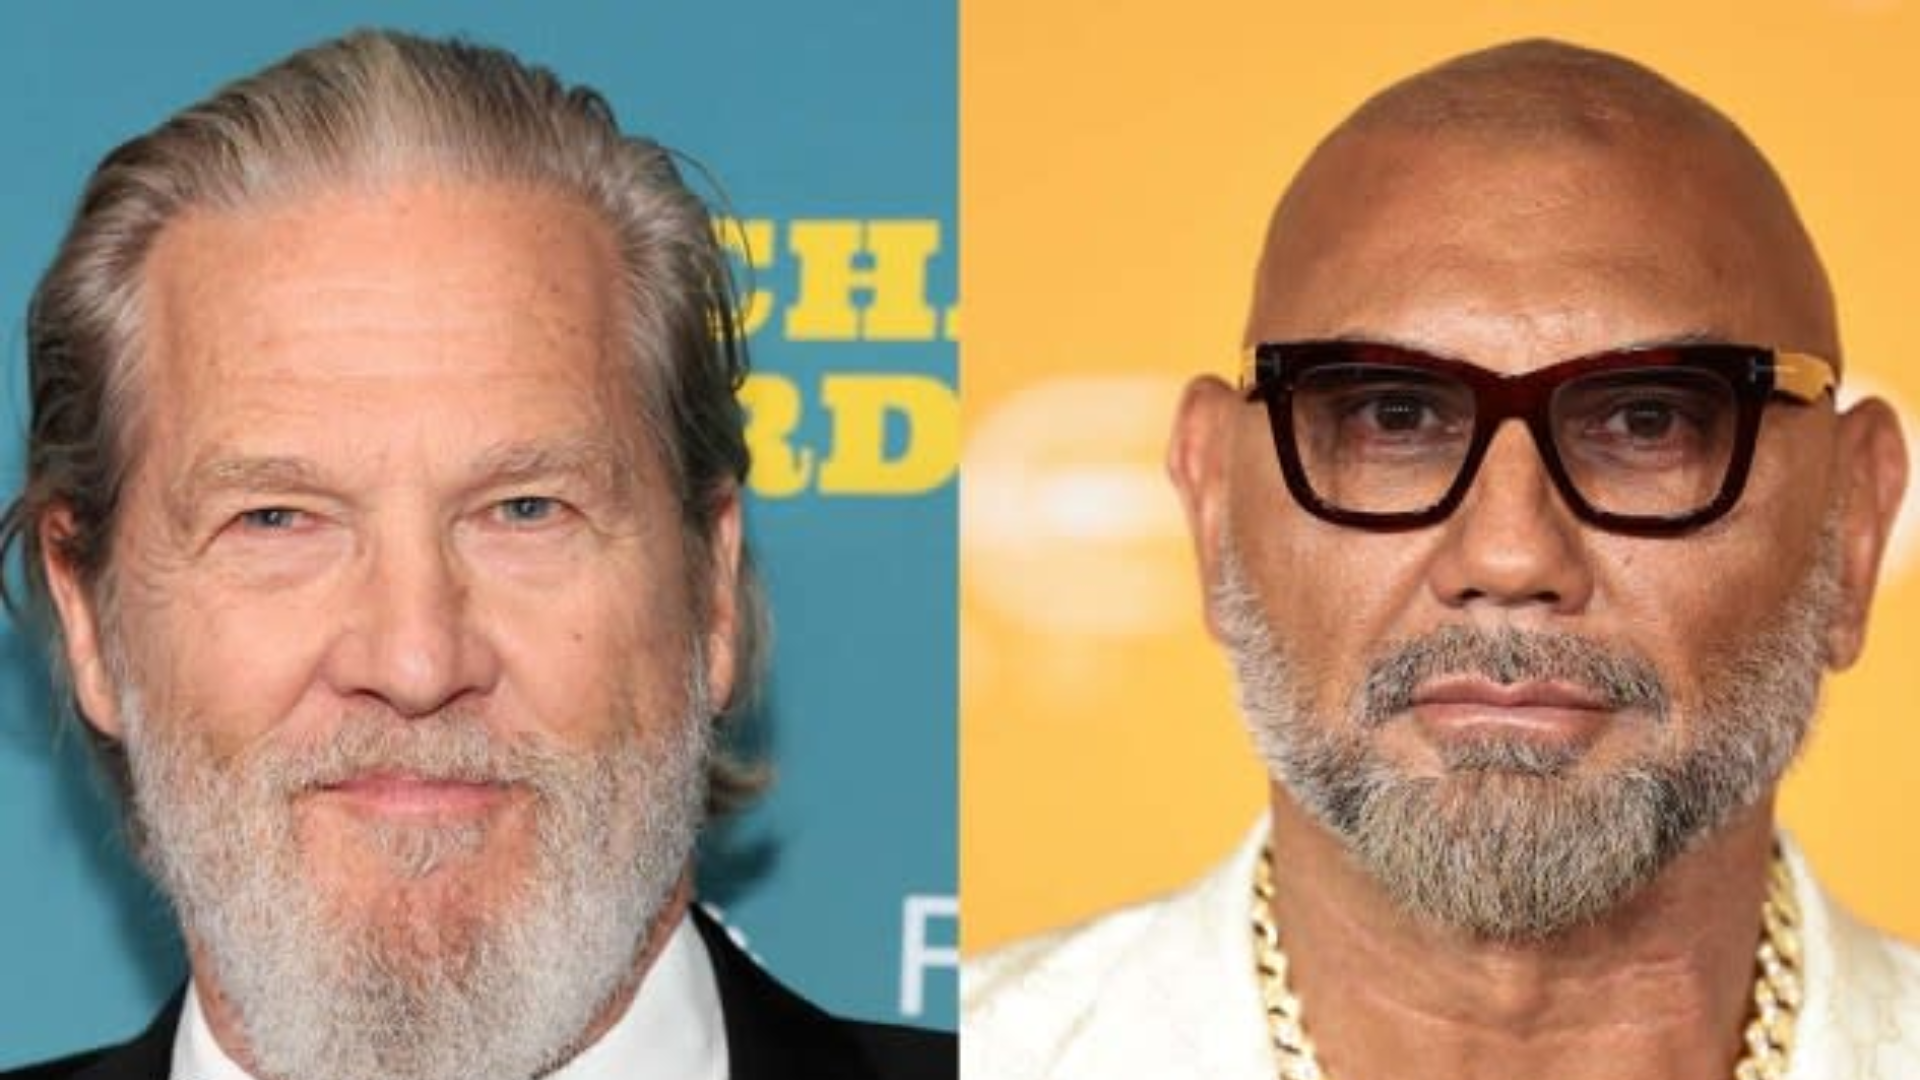  Jeff Bridges and Dave Bautista to Star in Live-Action Monster Movie ‘Grendel’